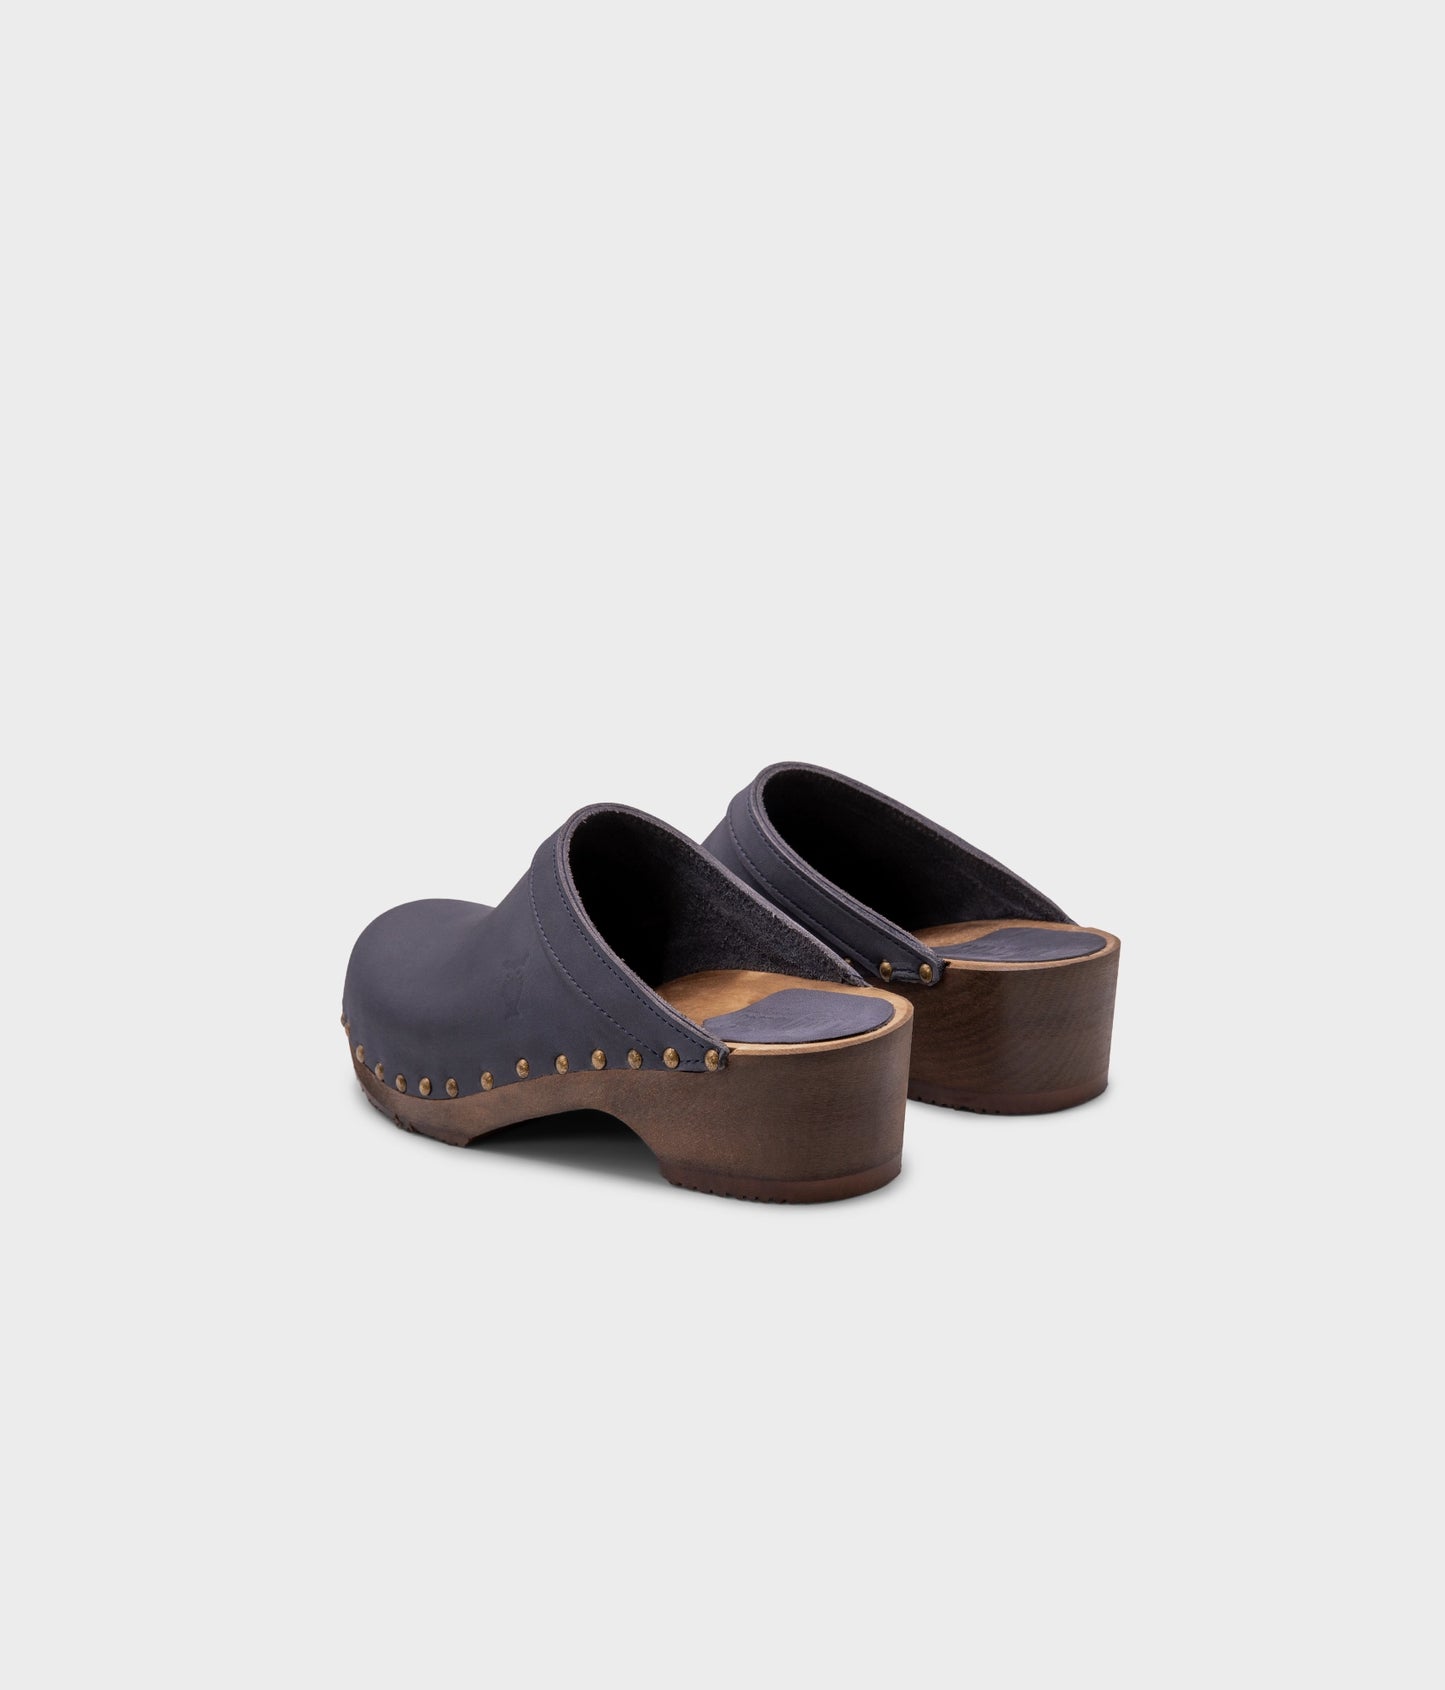 low heeled clog mules in navy nubuck leather stapled on a dark wooden base with brass gold studs